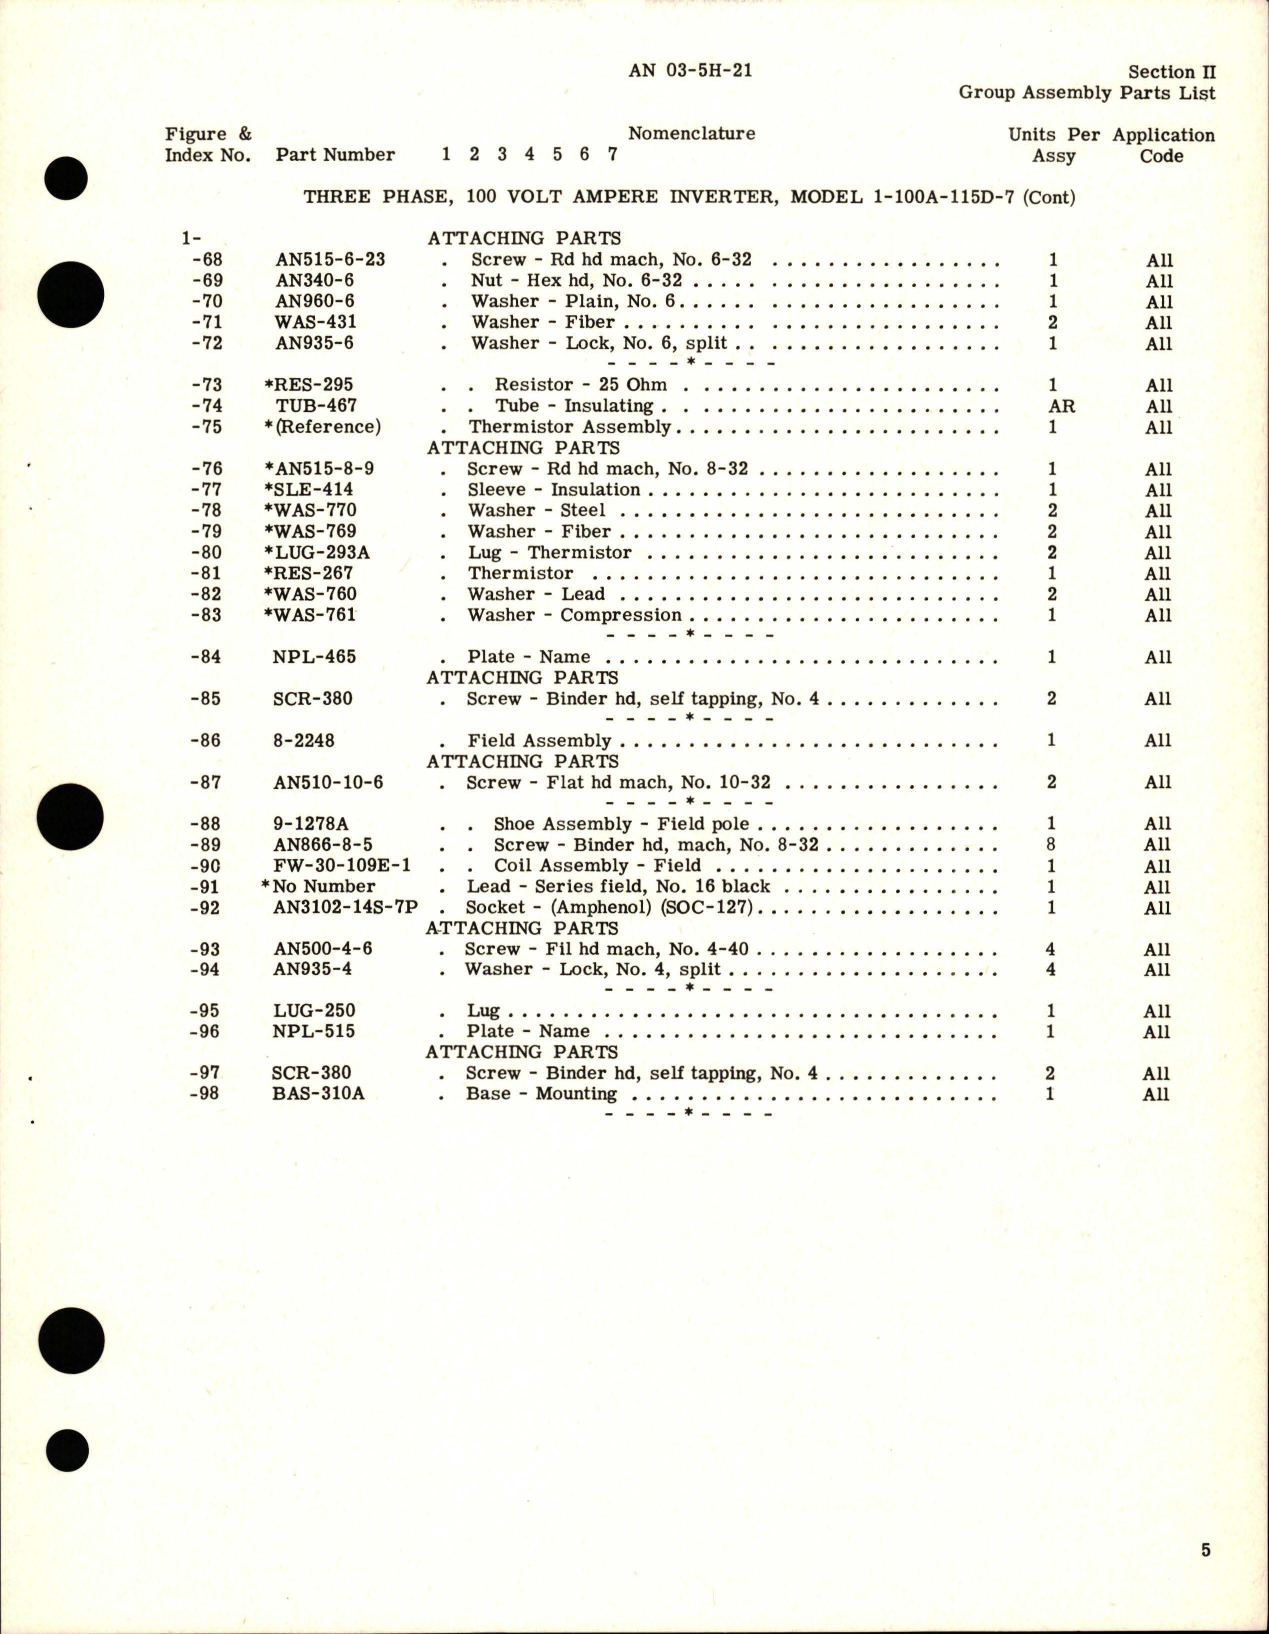 Sample page 7 from AirCorps Library document: Parts Catalog for Inverter - 100 VA - Models 1-100A-115D, 1-100A-115D-7, and 1-100A-115D-6